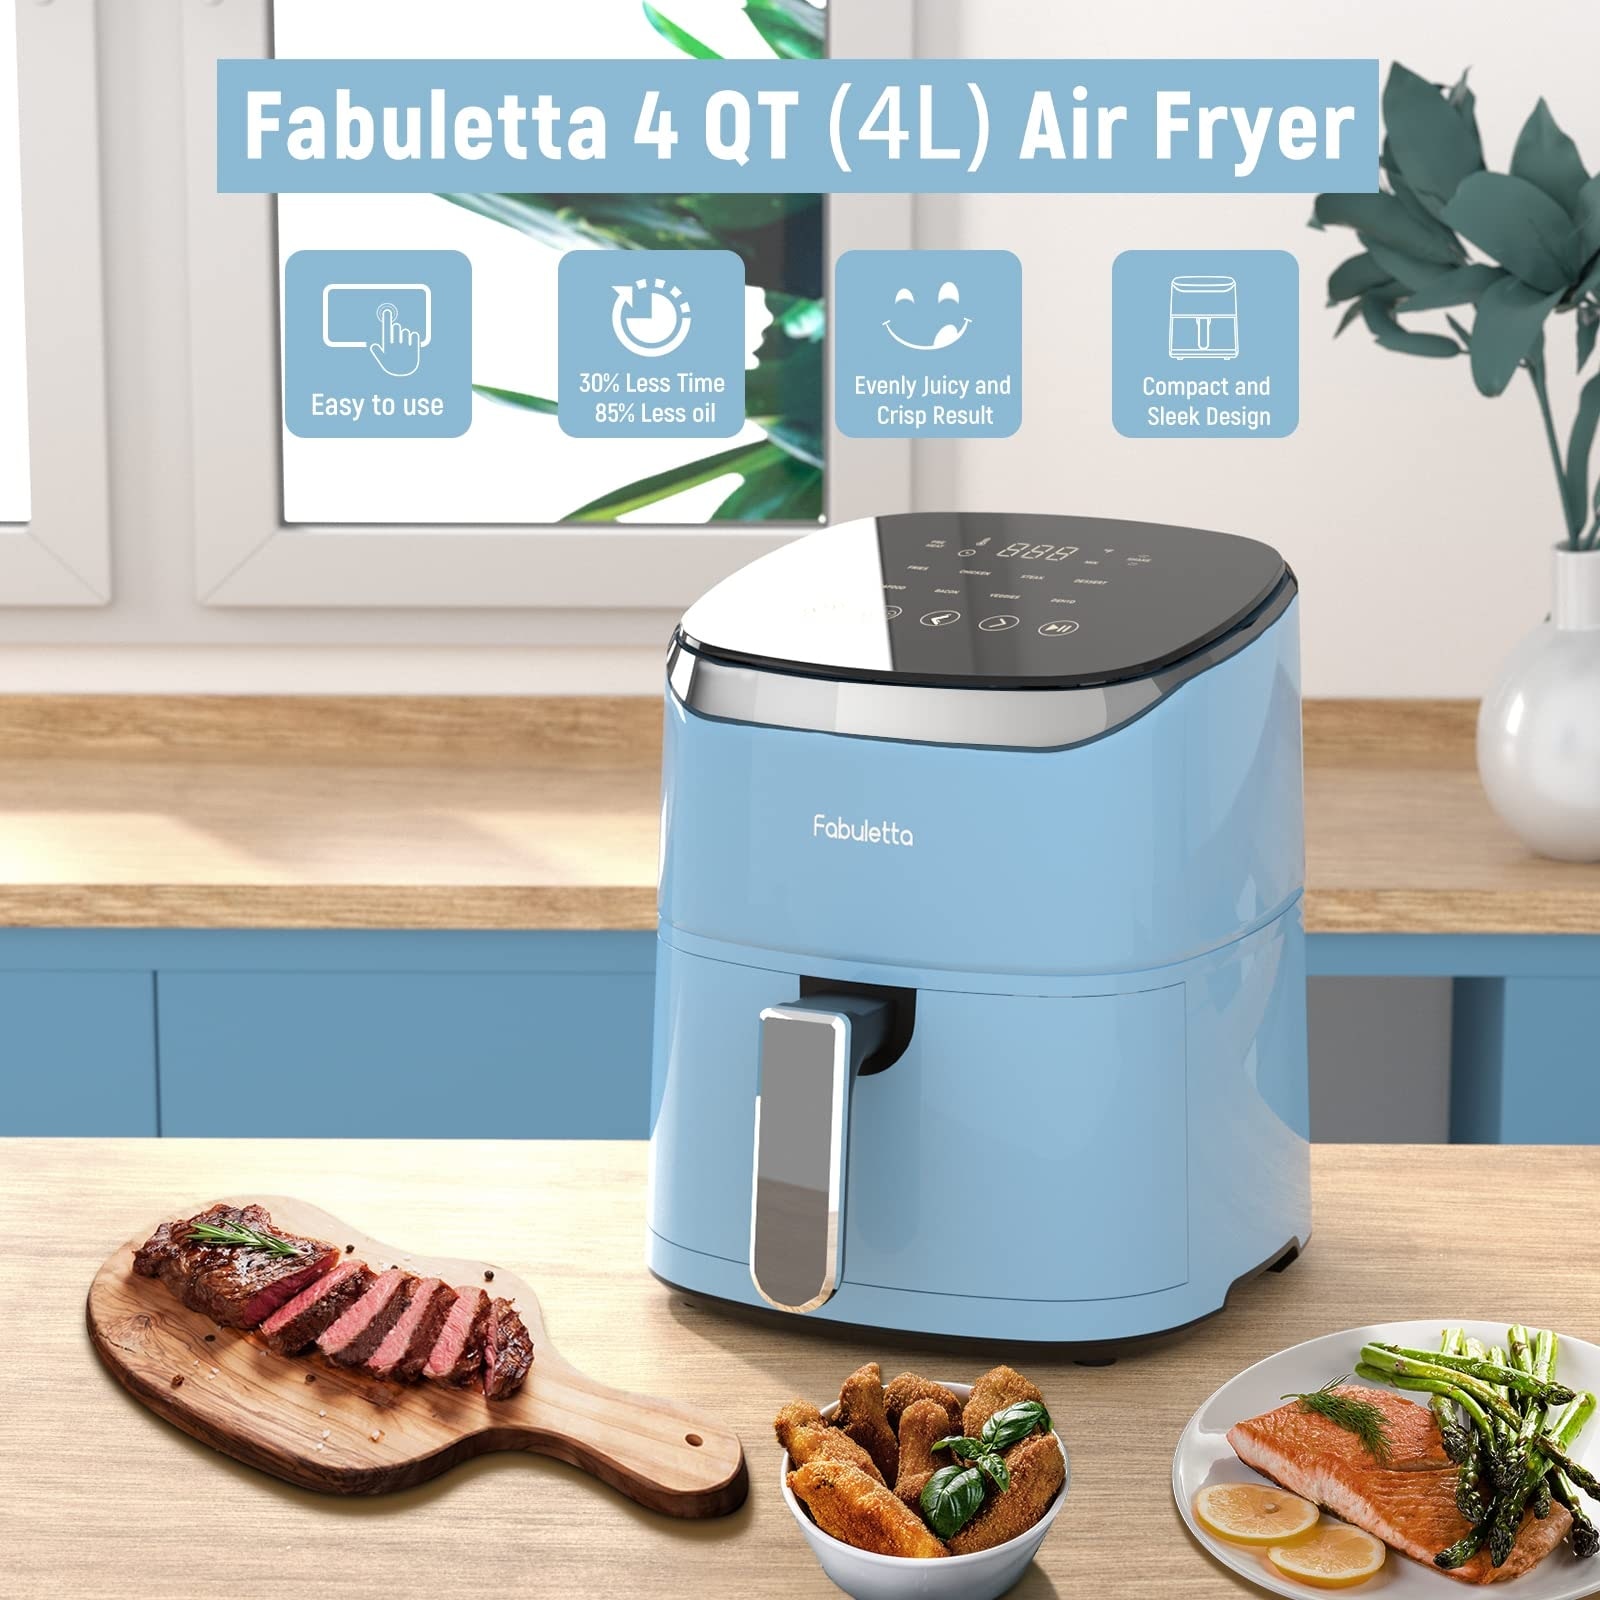 https://ak1.ostkcdn.com/images/products/is/images/direct/d7b3c04d3a926381aa4e30ac45b08712da486dfb/Air-Fryer%2C-9-Cooking-Functions-Electric-Air-Fryers%2C-Shake-Reminder%2C%C2%A0-1550W-Electric-Hot-Air-Fryer-Oilless-Cooker.jpg